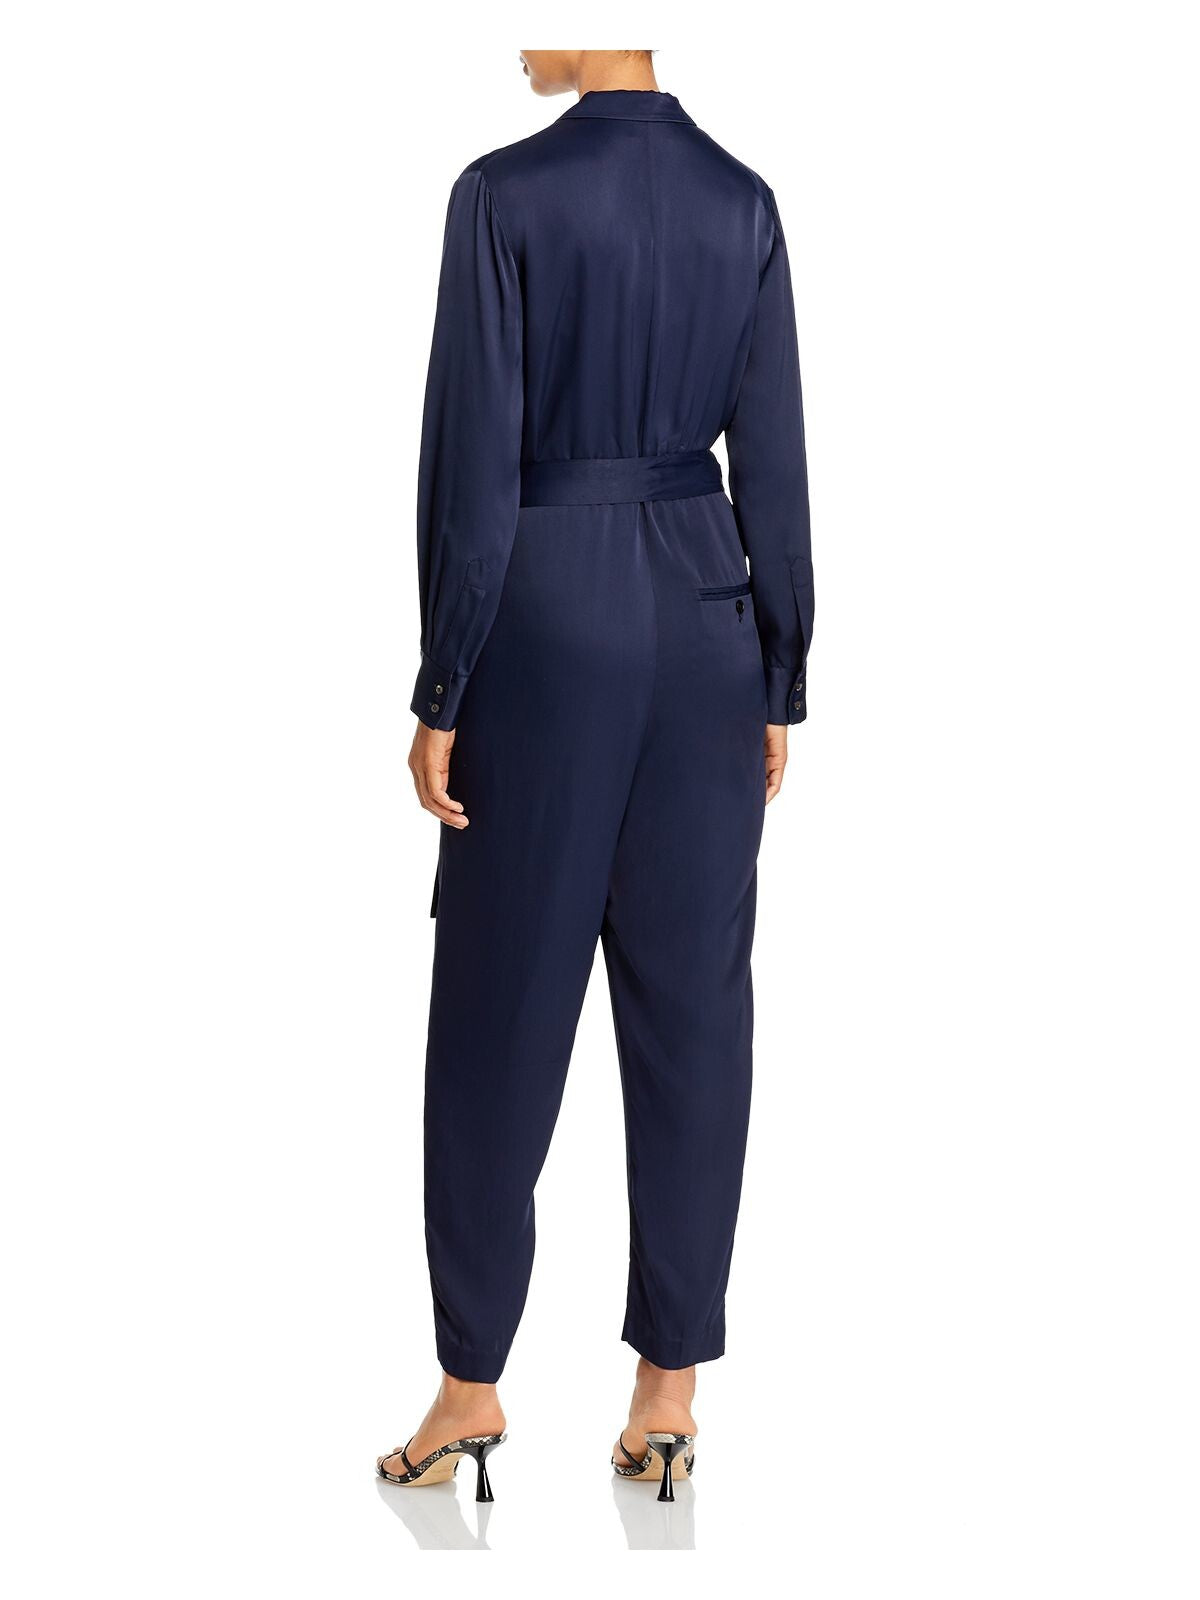 3.1 PHILLIP LIM Womens Navy Belted Satin Tuxedo Collared Evening Cropped Jumpsuit 8